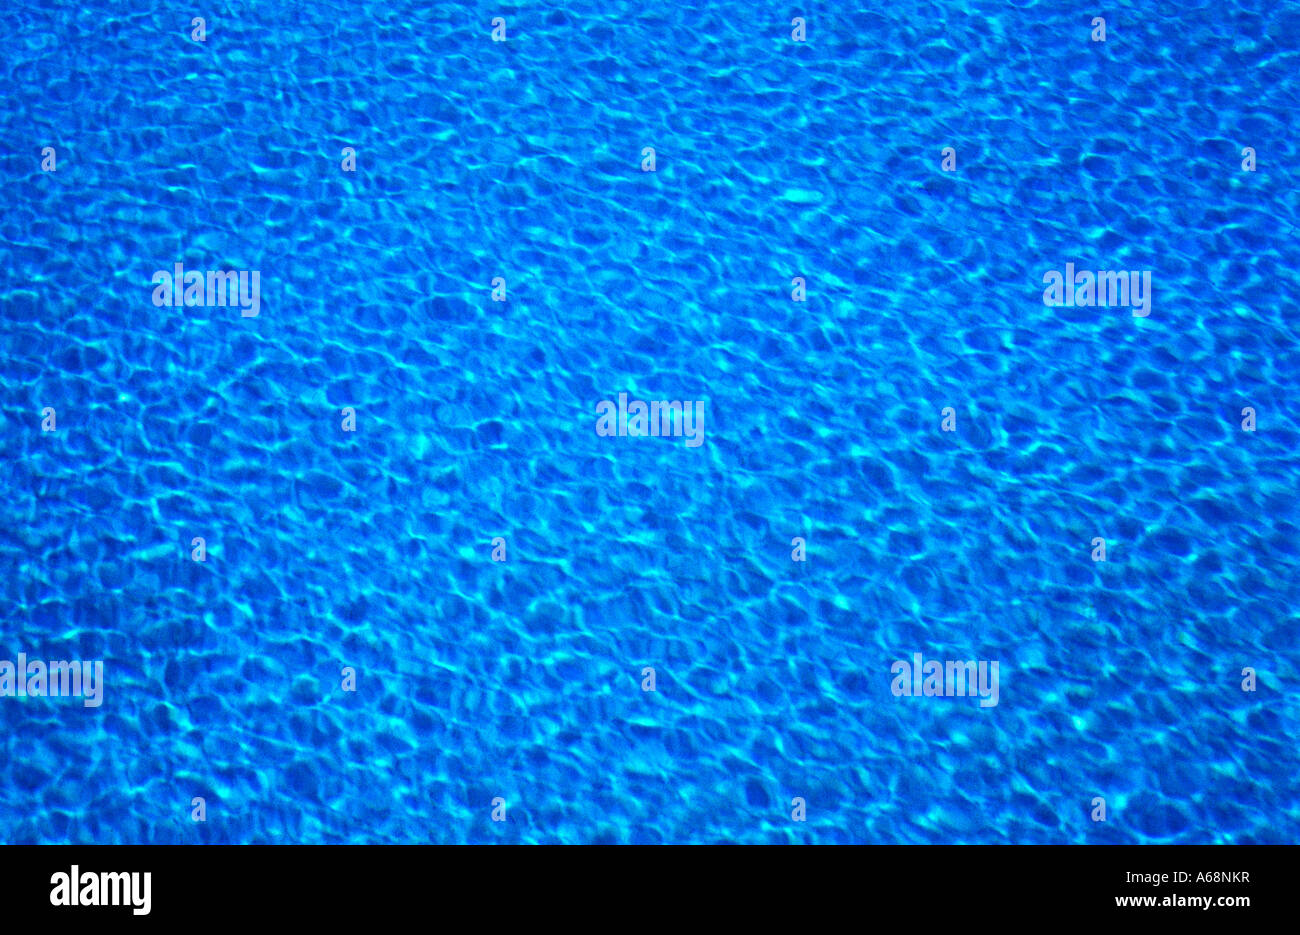 Design by pool water Stock Photo